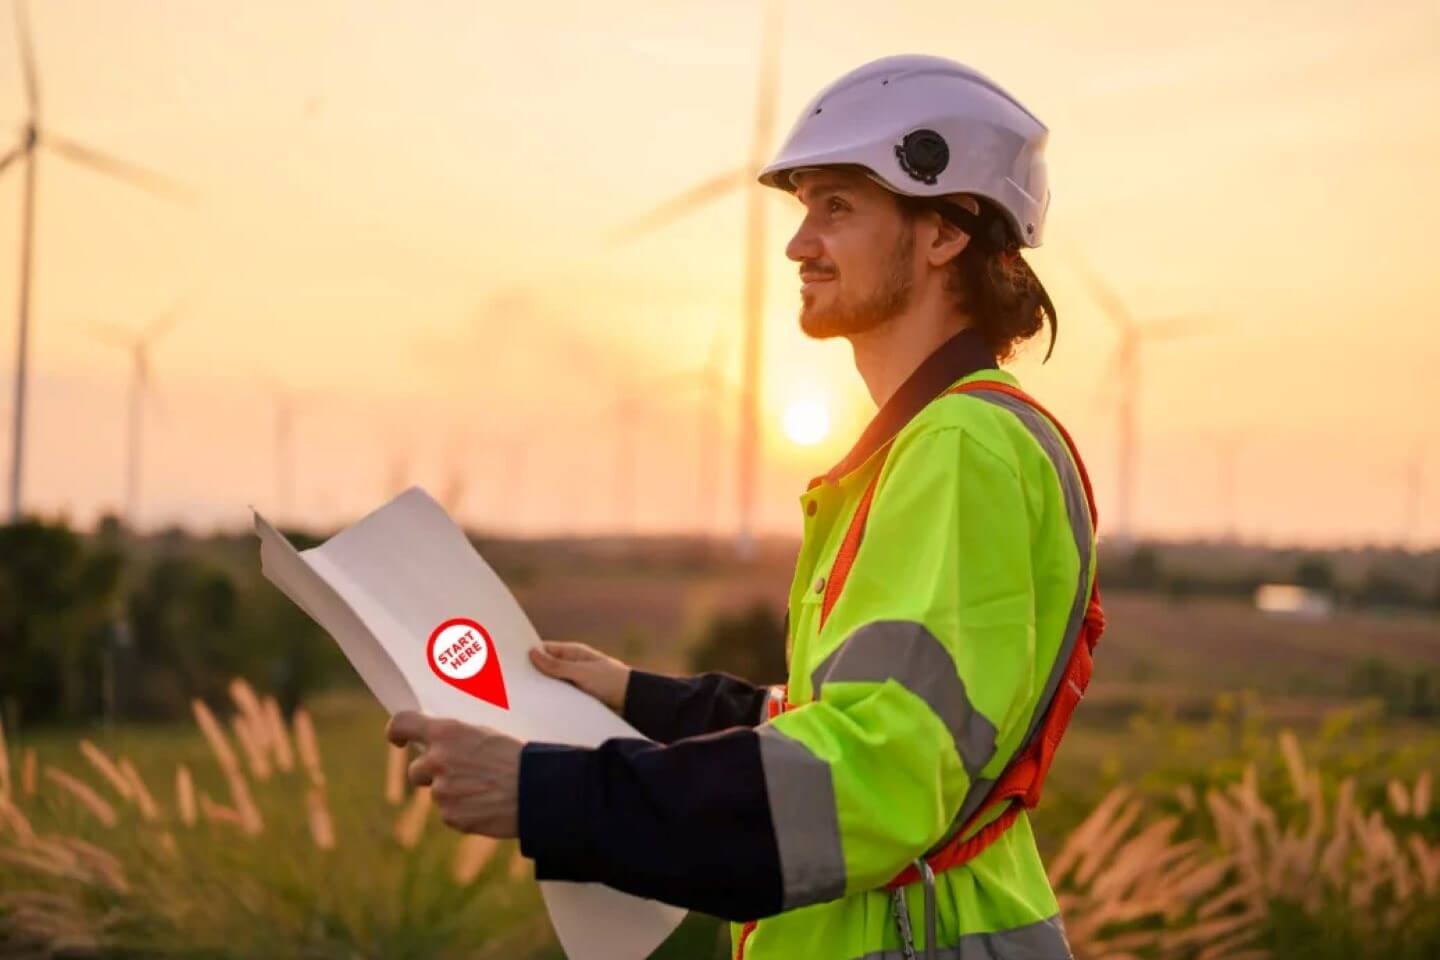 A civil engineer in a field as the sun sets in the background with windmills